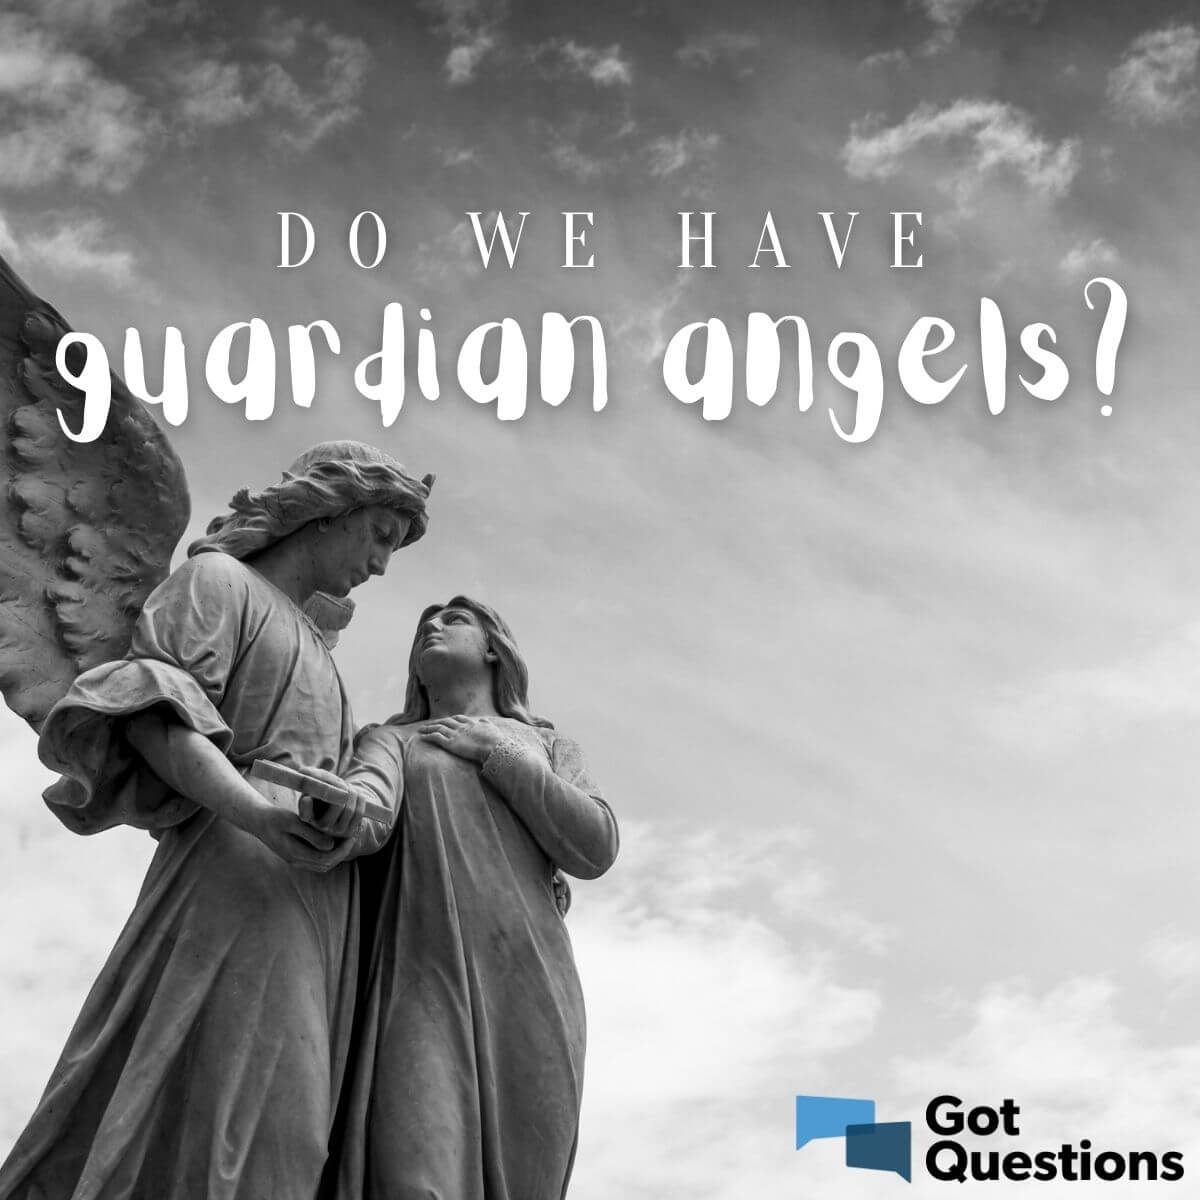 How many guardian angels do we have Christianity?